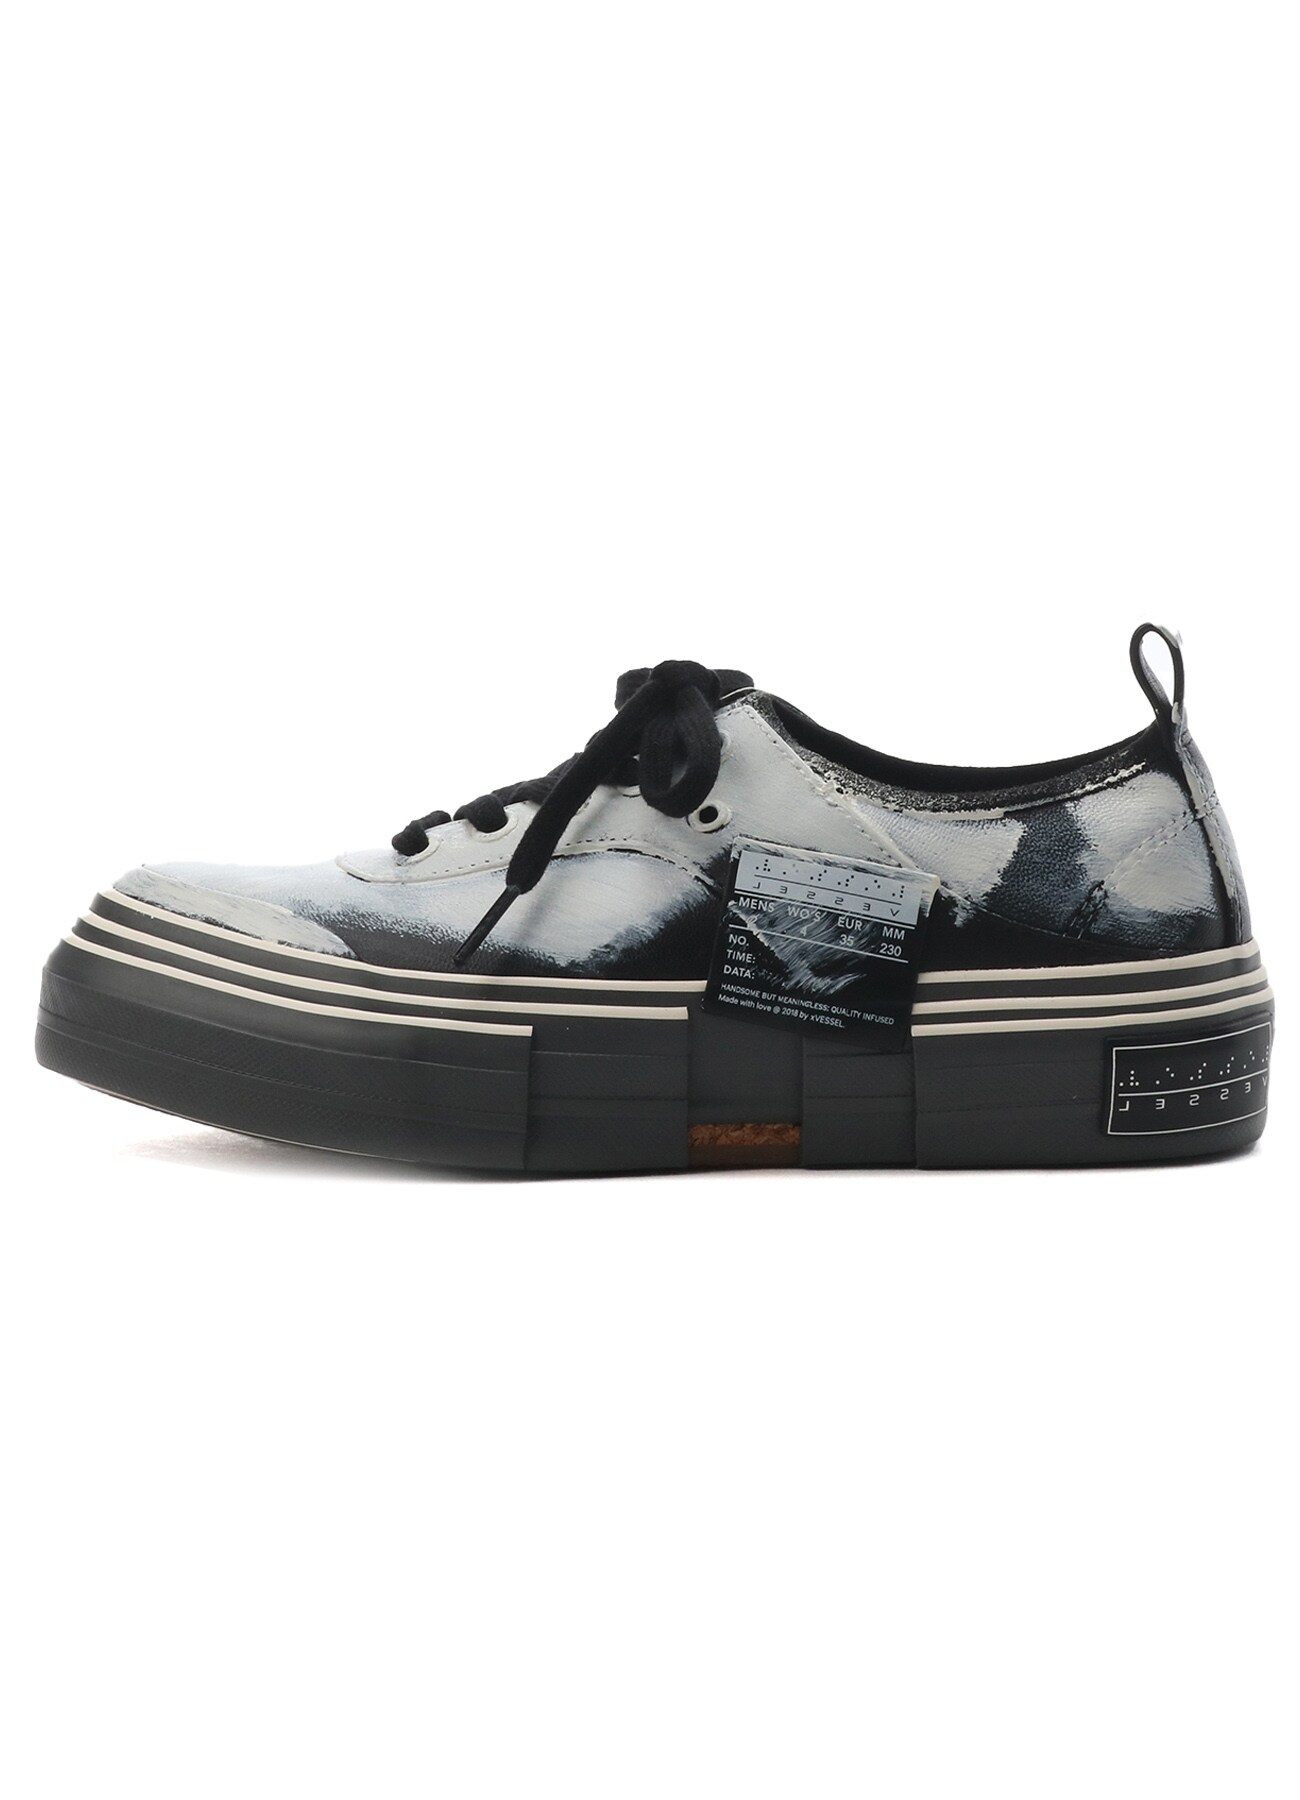 PT SHEEP LEATHER PAINT LOWCUT SNEAKERS